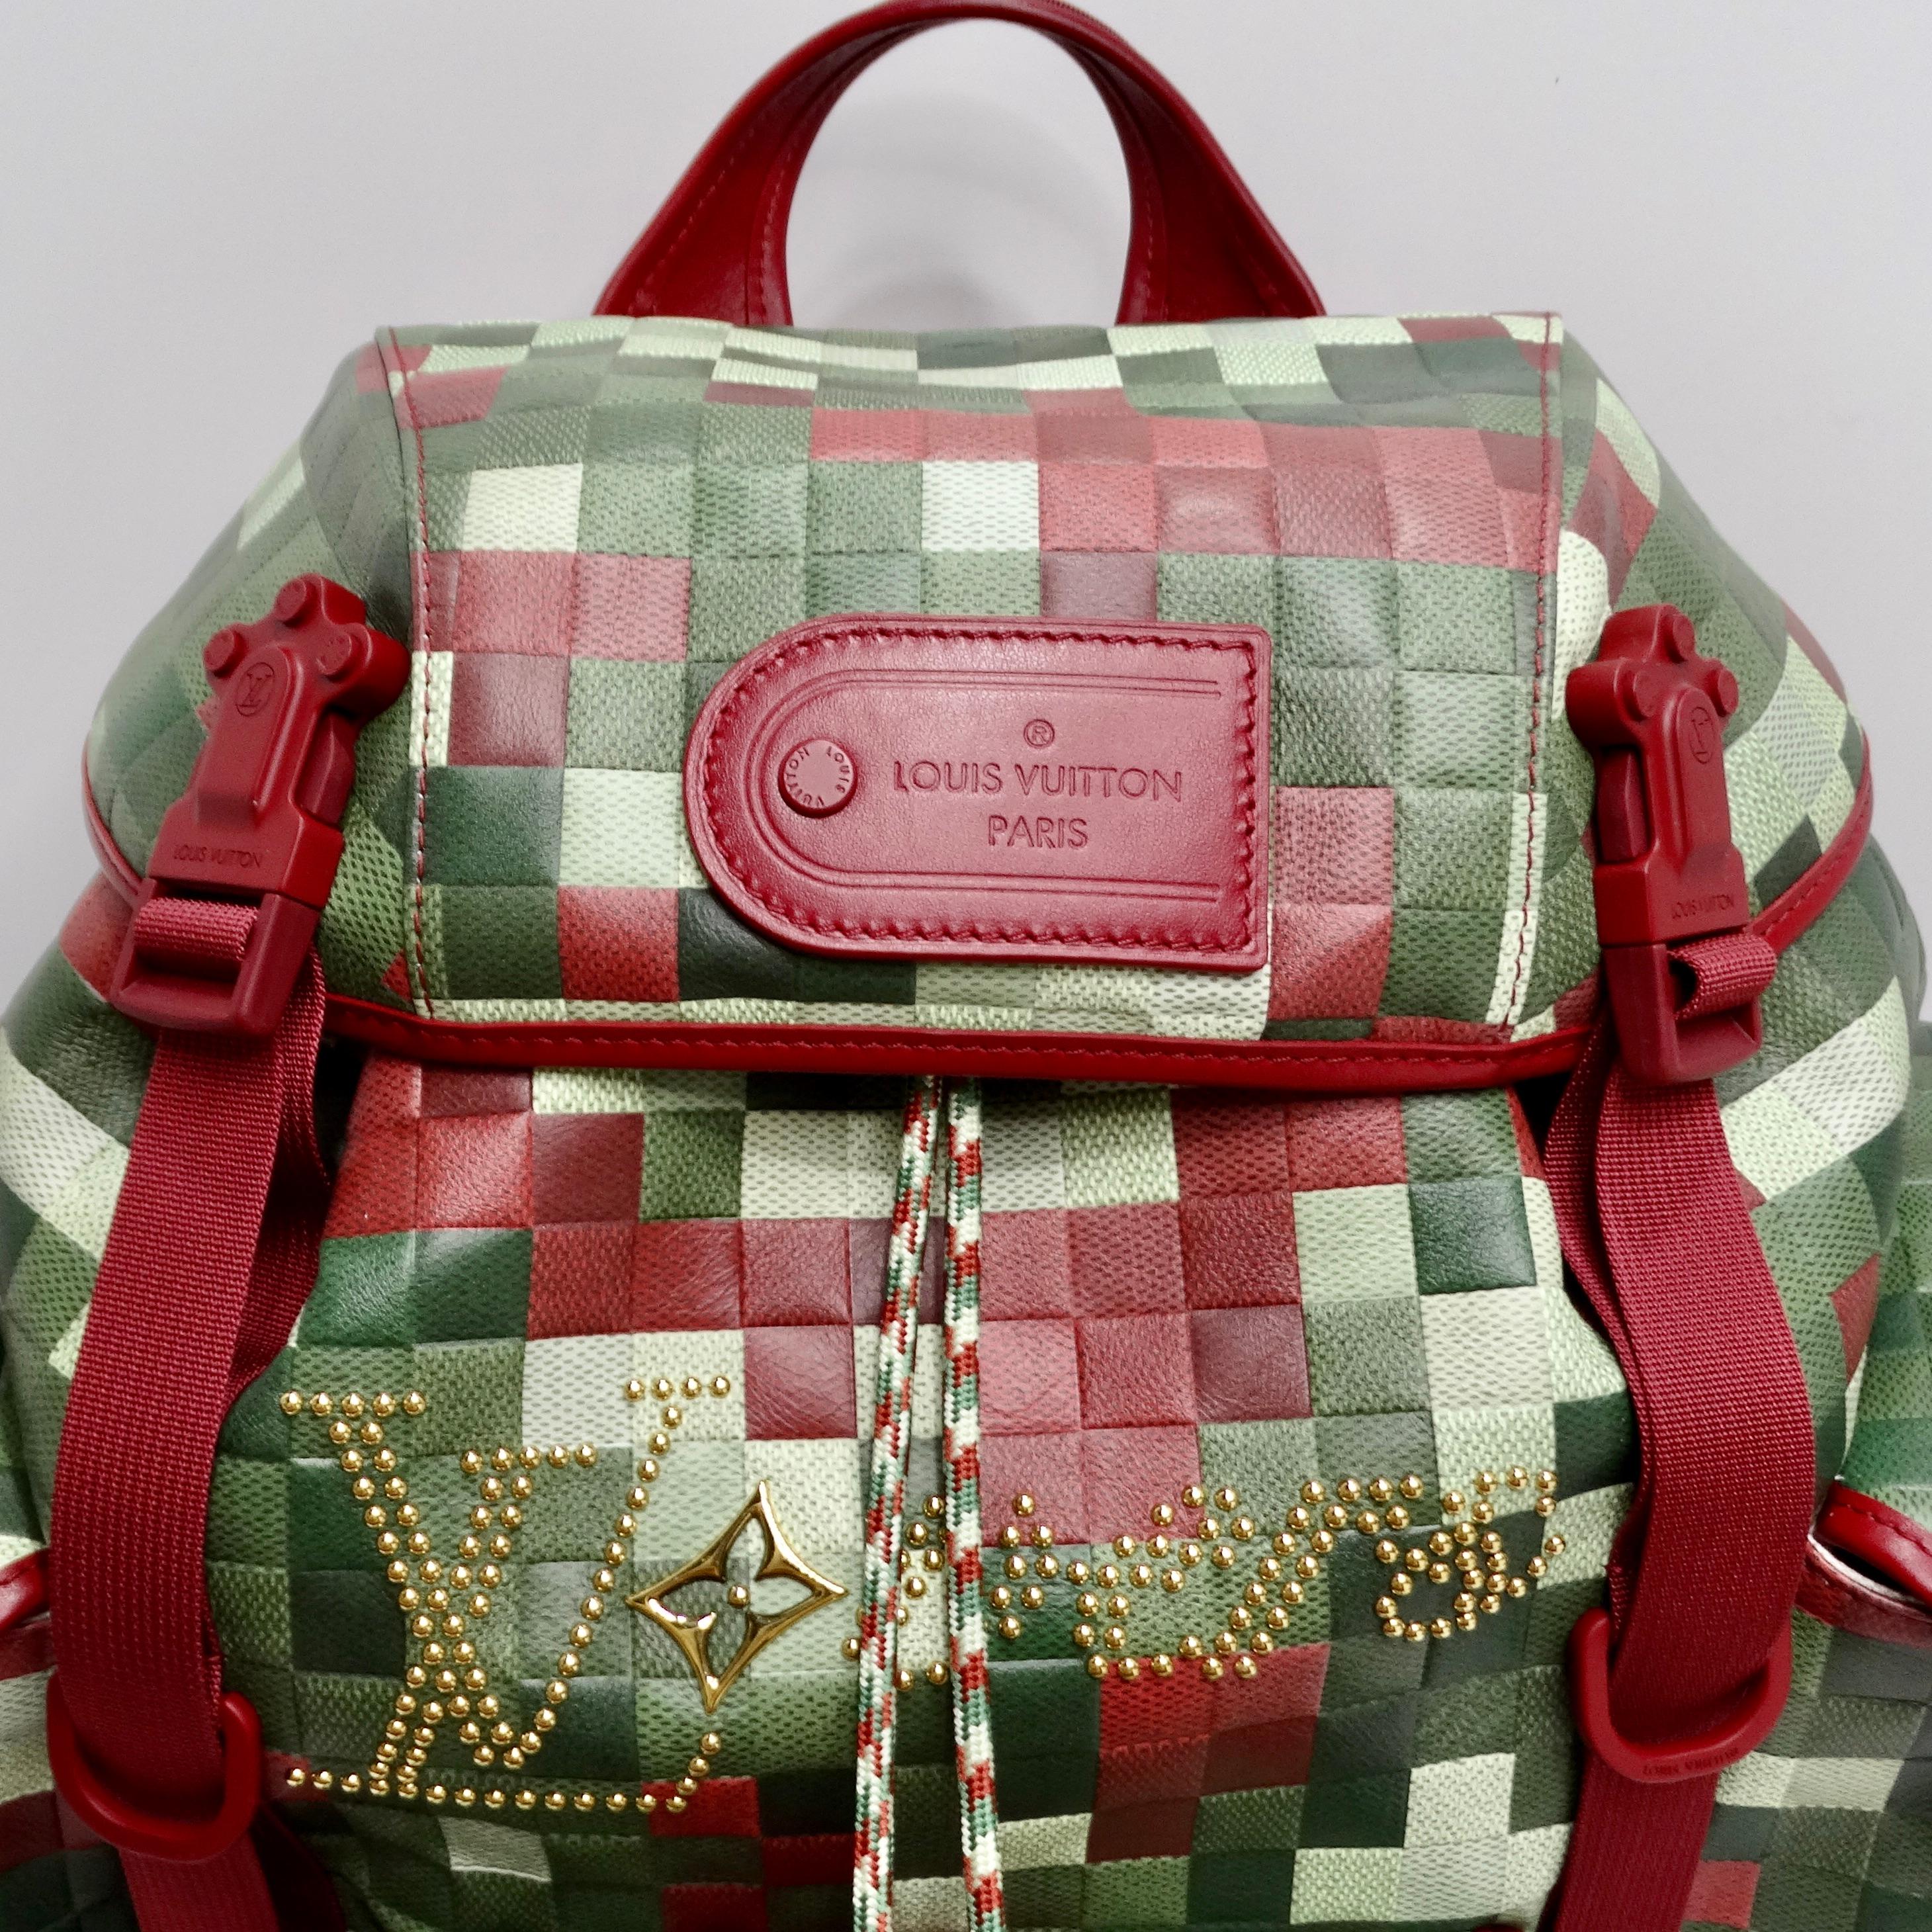 Introducing the Louis Vuitton Spring 2024 Limited Edition Camouflage Damier Backpack, a rare and exquisite piece from Pharrell Williams' iconic first Louis Vuitton men's collection. This backpack is a true collector's item, with only 10 of this